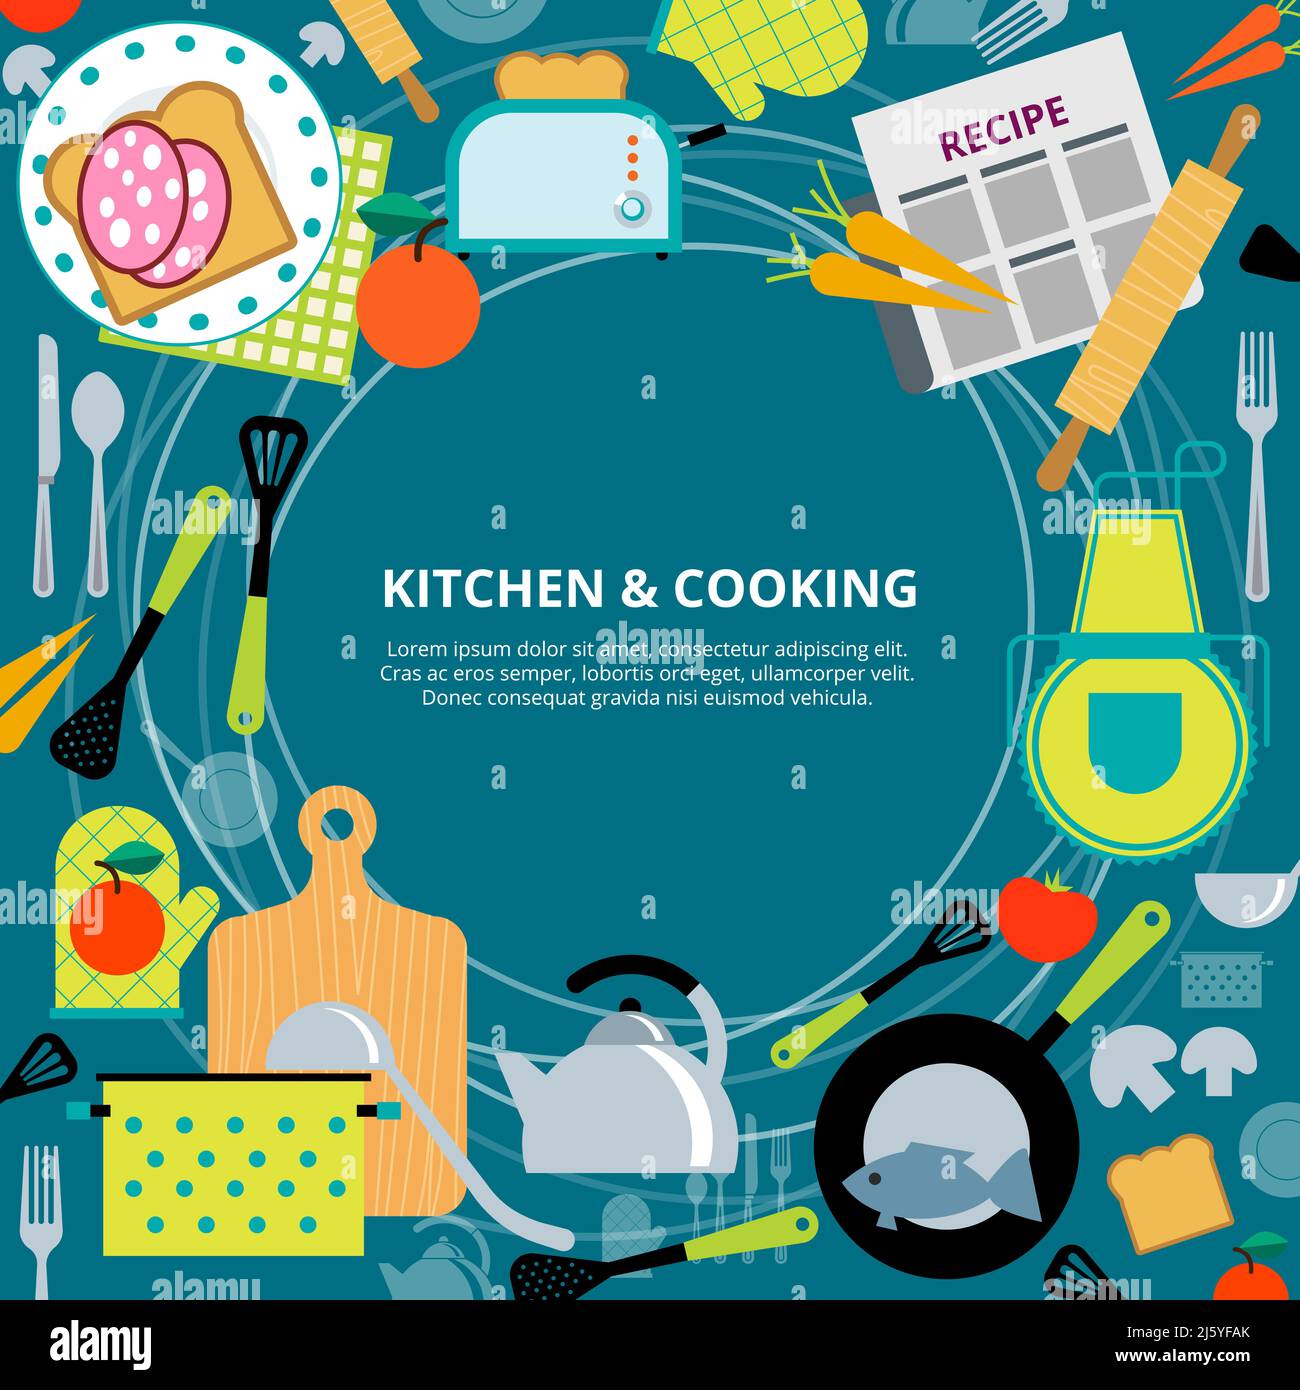 Home healthy and fast cooking  concept poster with kitchen appliances and recipes  pictograms composition abstract vector illustration Stock Vector